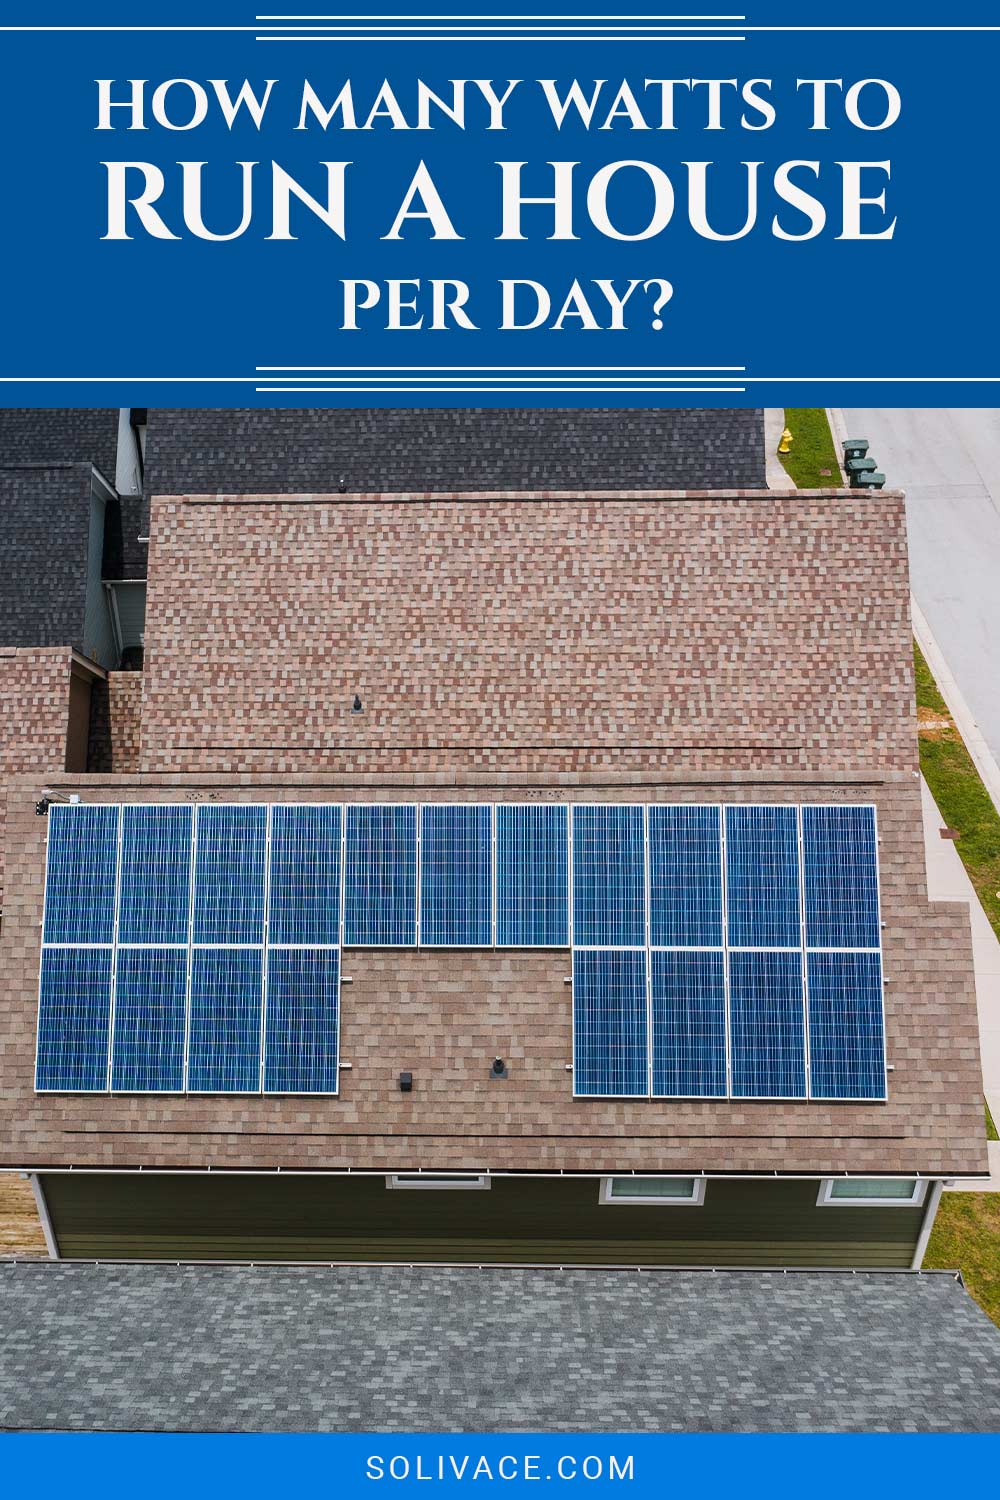 How Many Watts To Run A House Per Day?